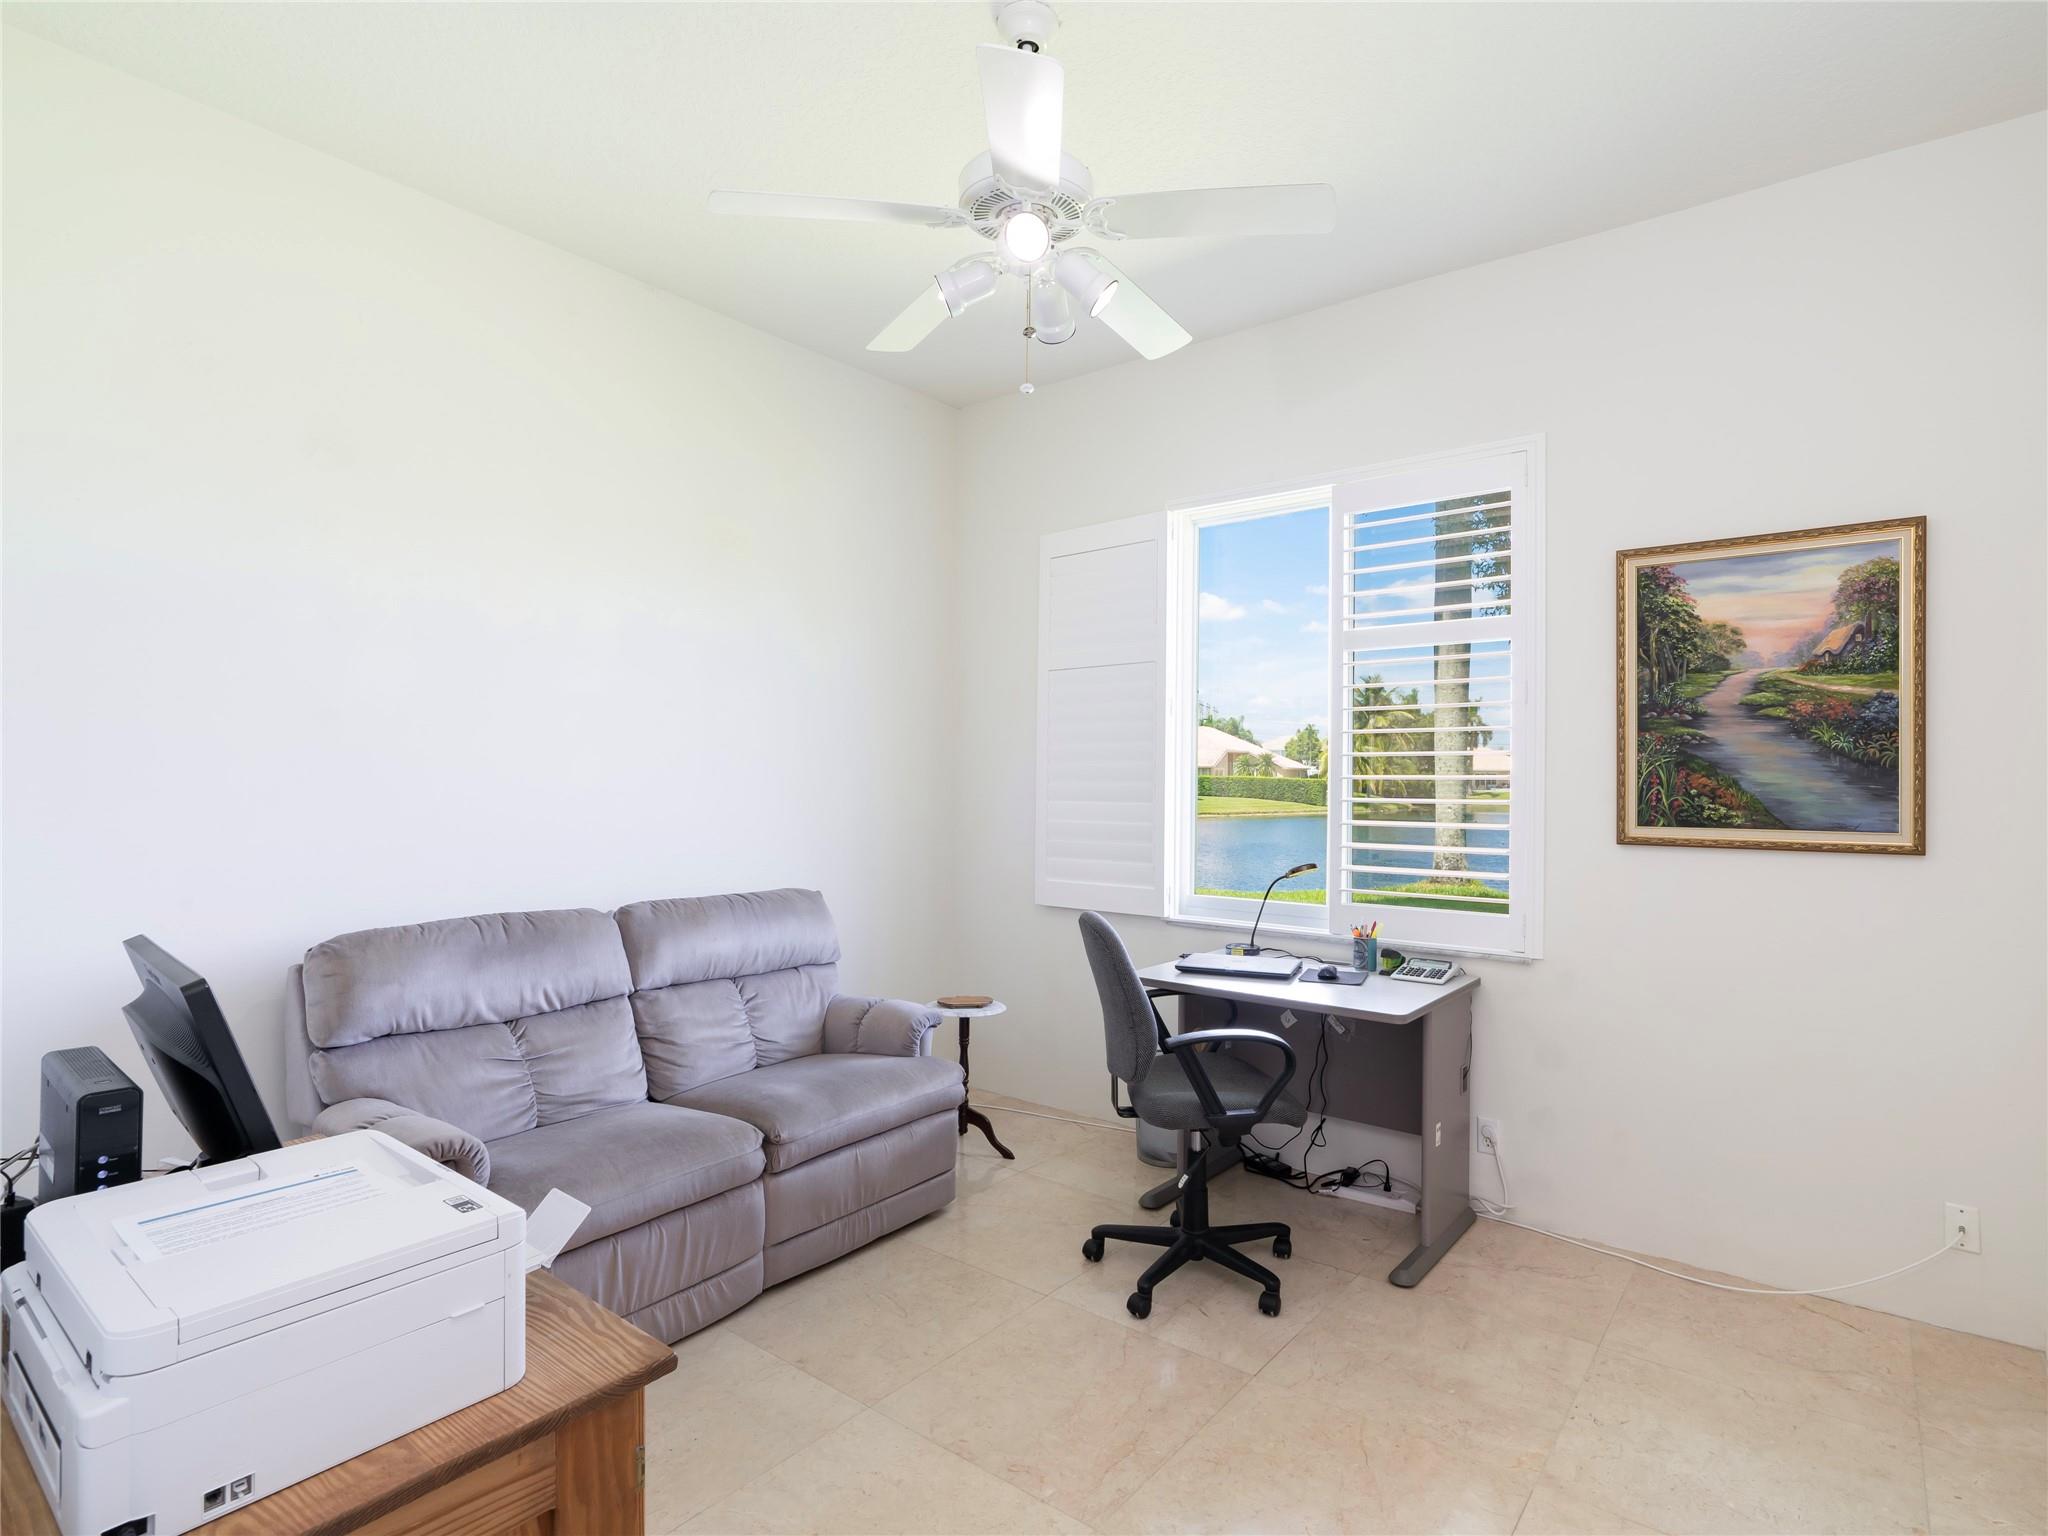 Photo 20 of home located at 16203 S Segovia Cir, Fort Lauderdale FL